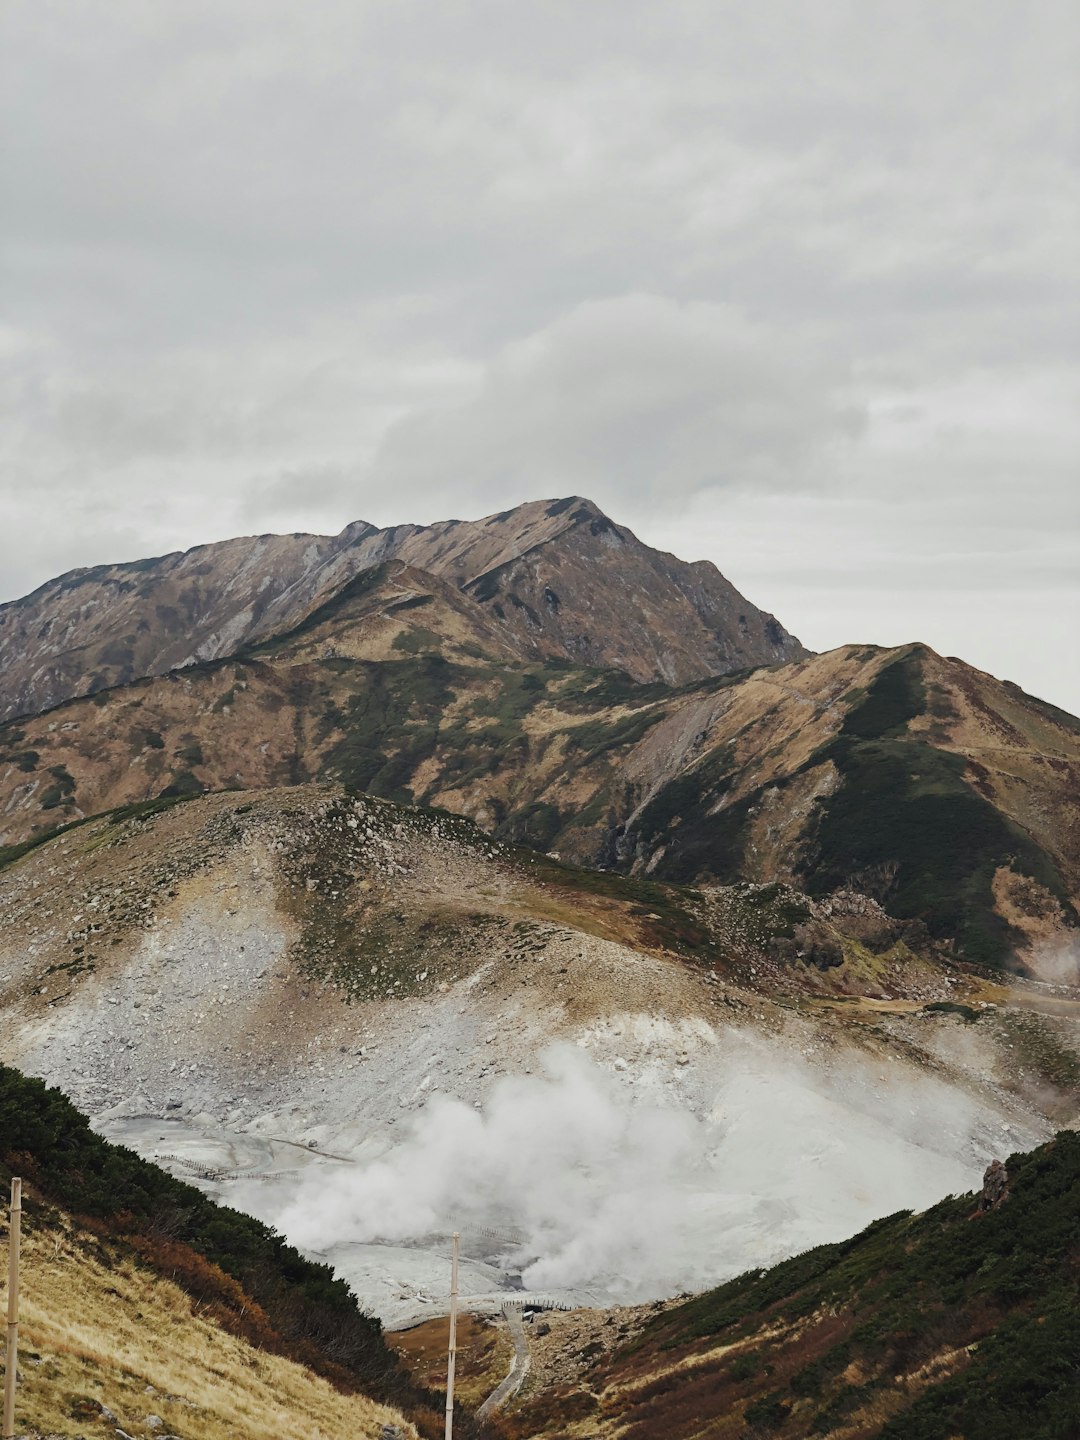 Travel Tips and Stories of Mount Tate in Japan